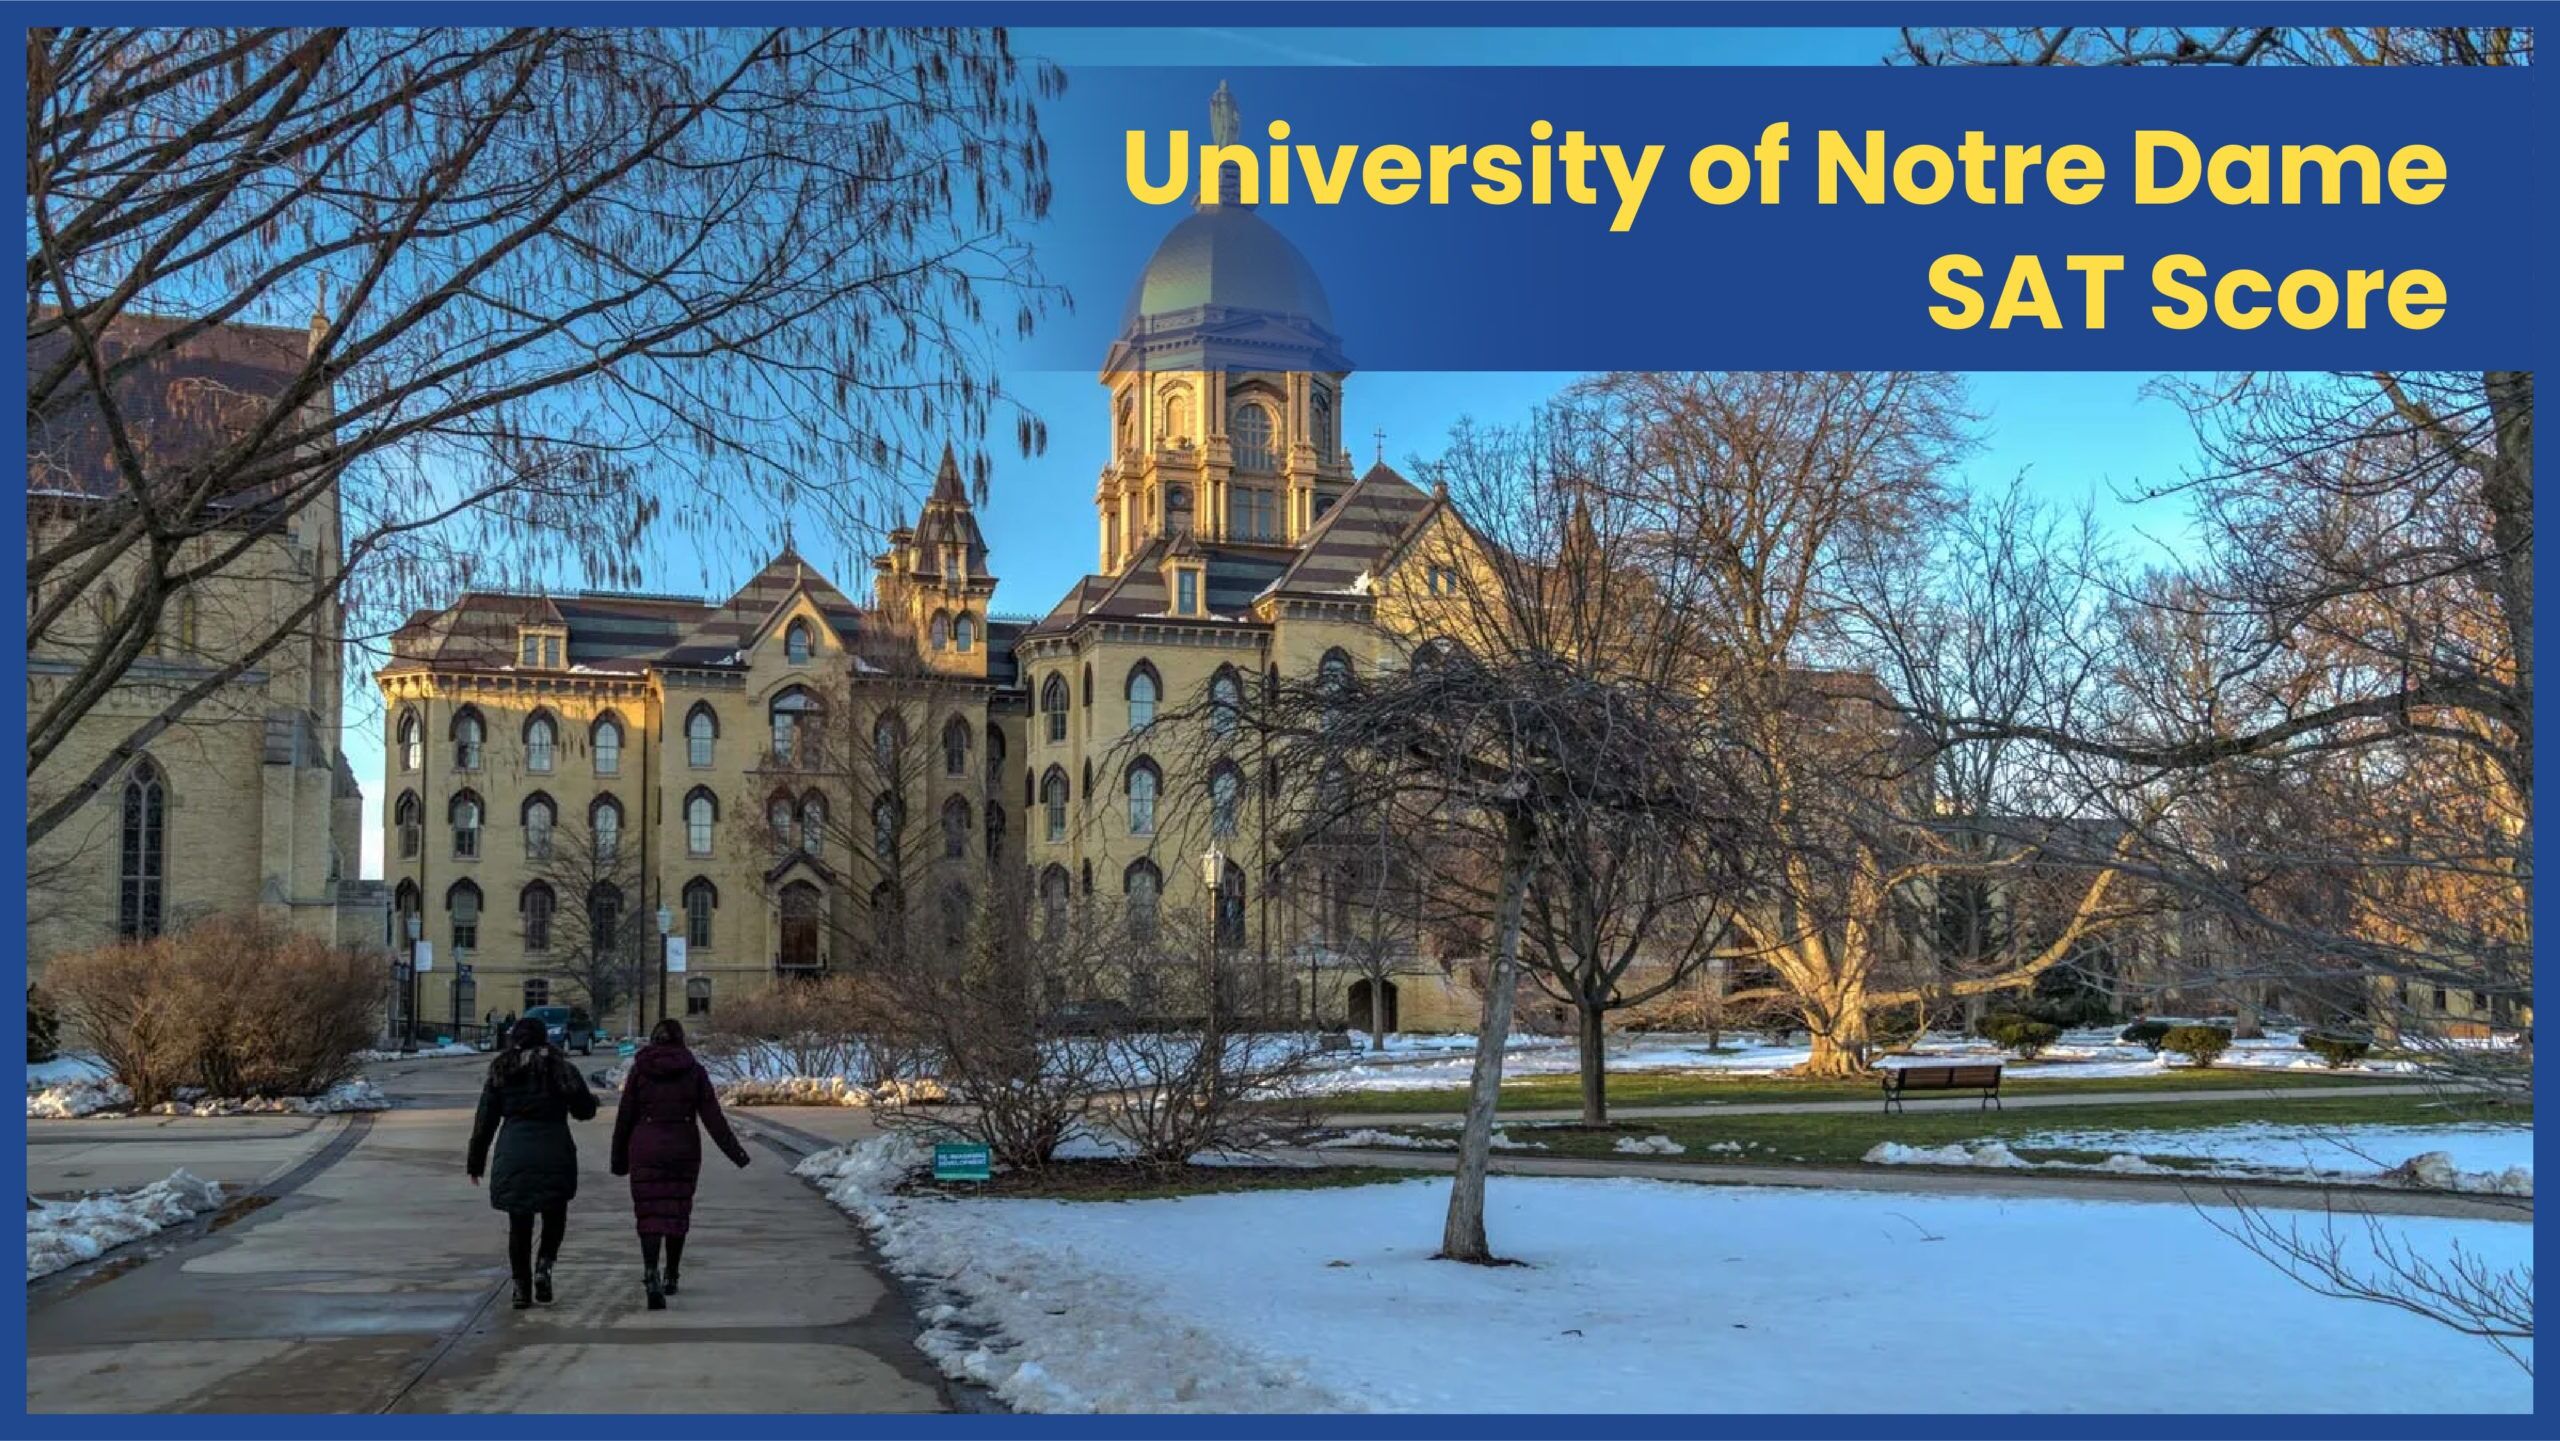 University of Notre Dame SAT scores and Admissions Criteria